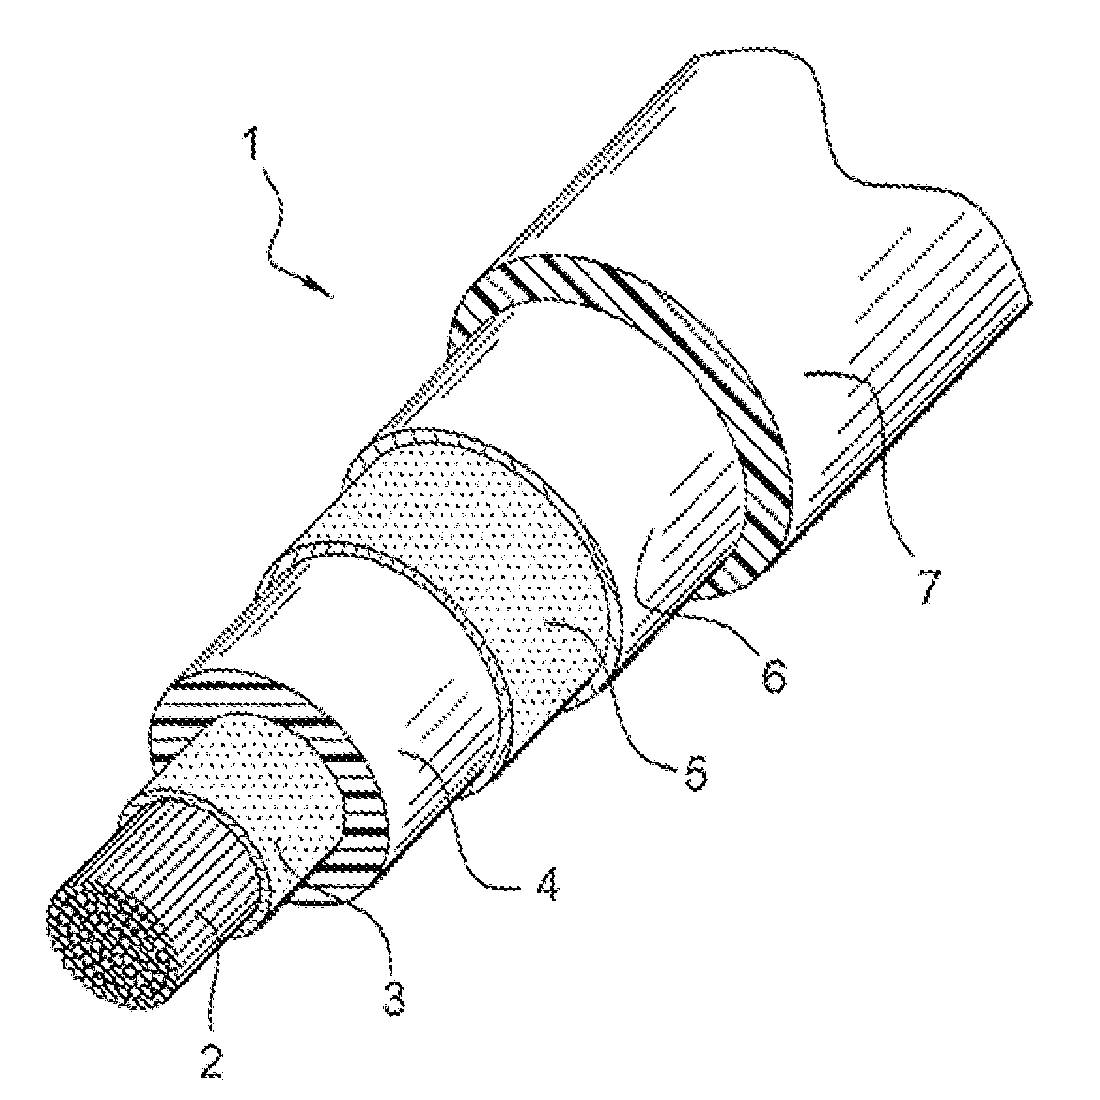 Electrical device comprising a crosslinked layer